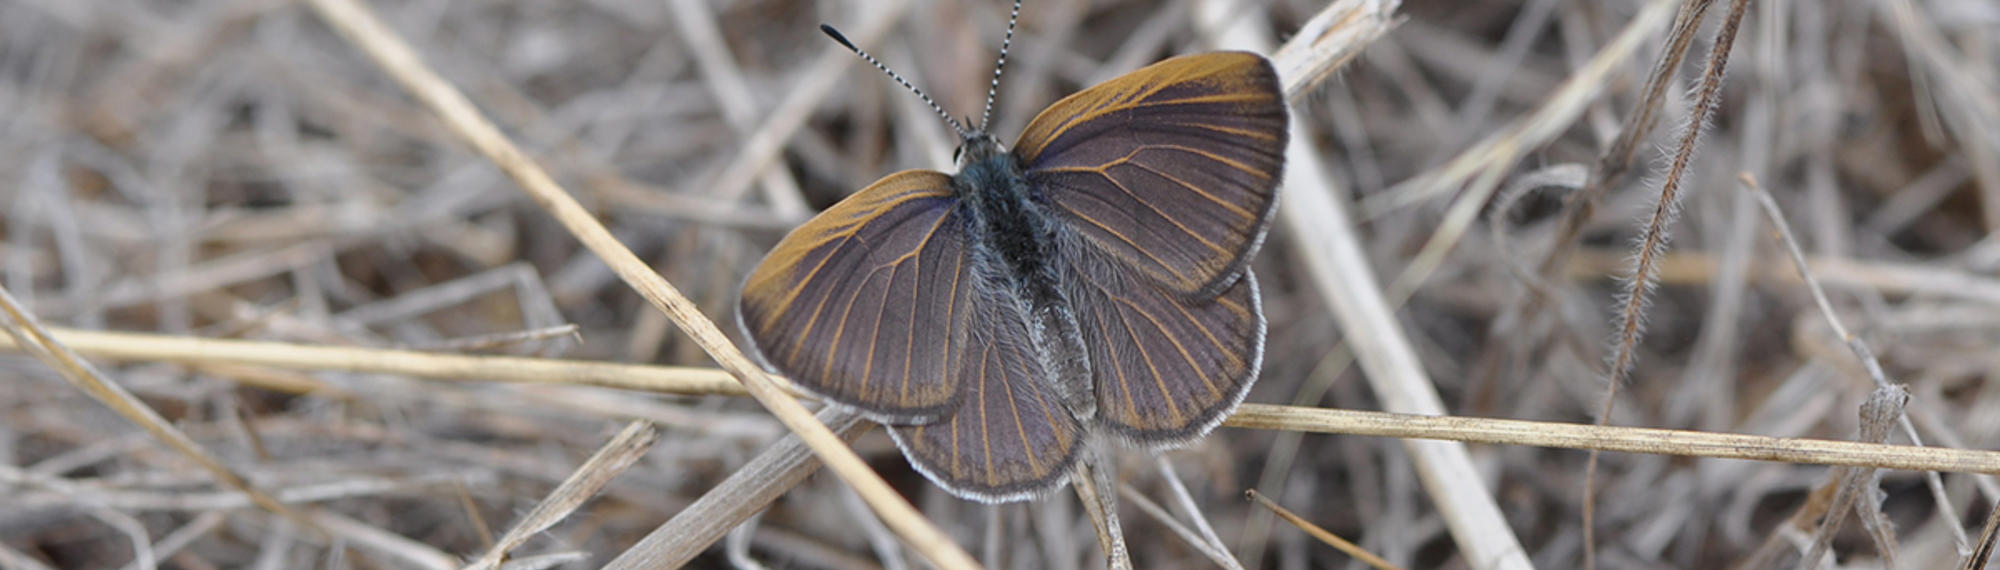 Golden Rayed Blue Butterfly resting with wings spread on dry grass. It is brown with faint iridescent blue suffusion and golden veins.